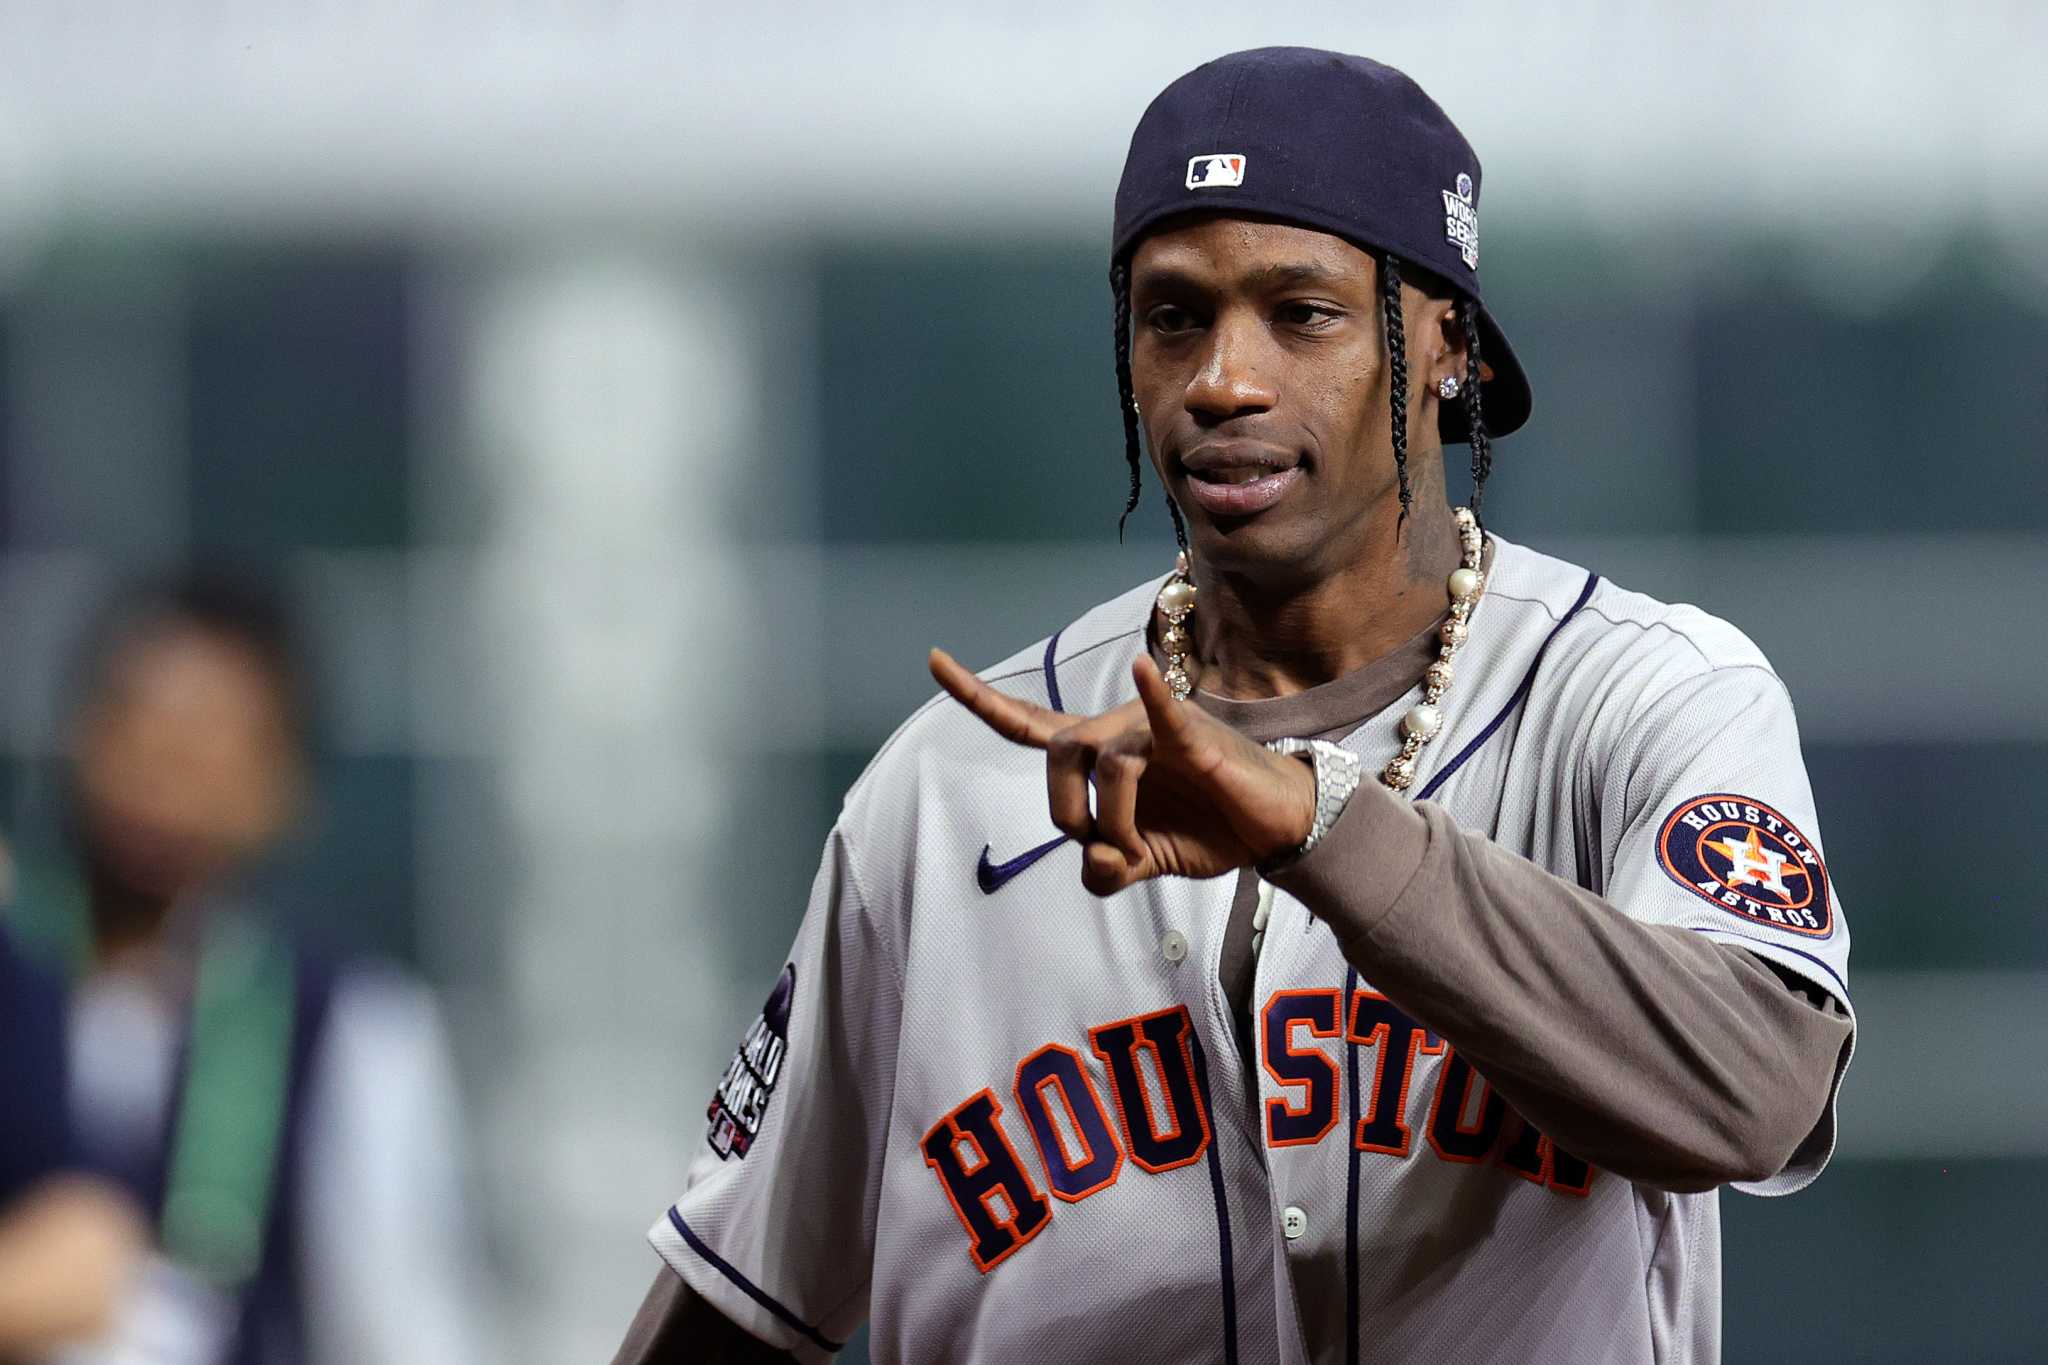 Travis Scott hyping up Astros fans at game 6 of the #WorldSeries ⚾️🔥 